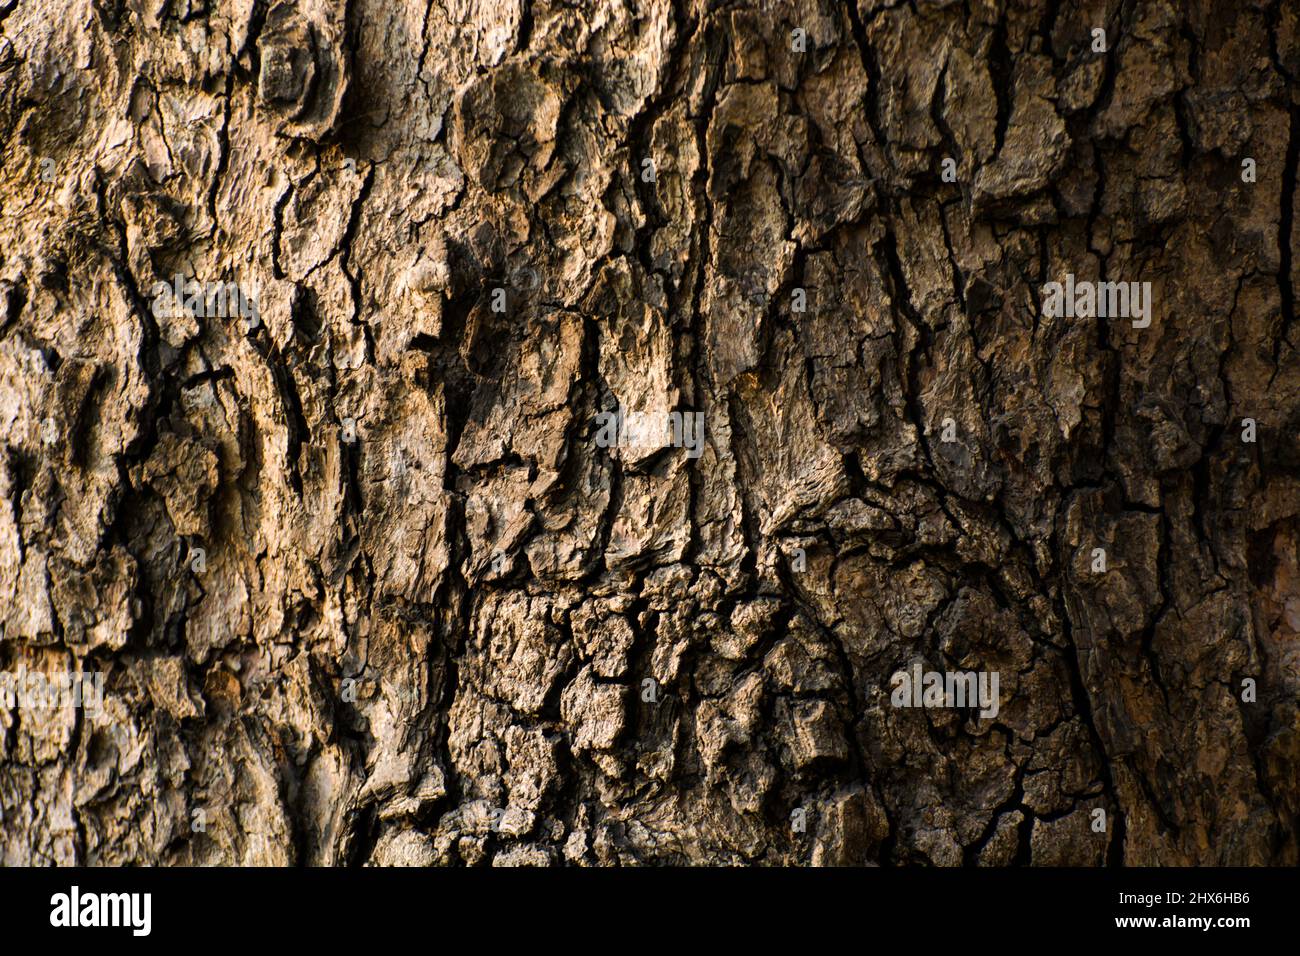 Wooden rough textured background Stock Photo